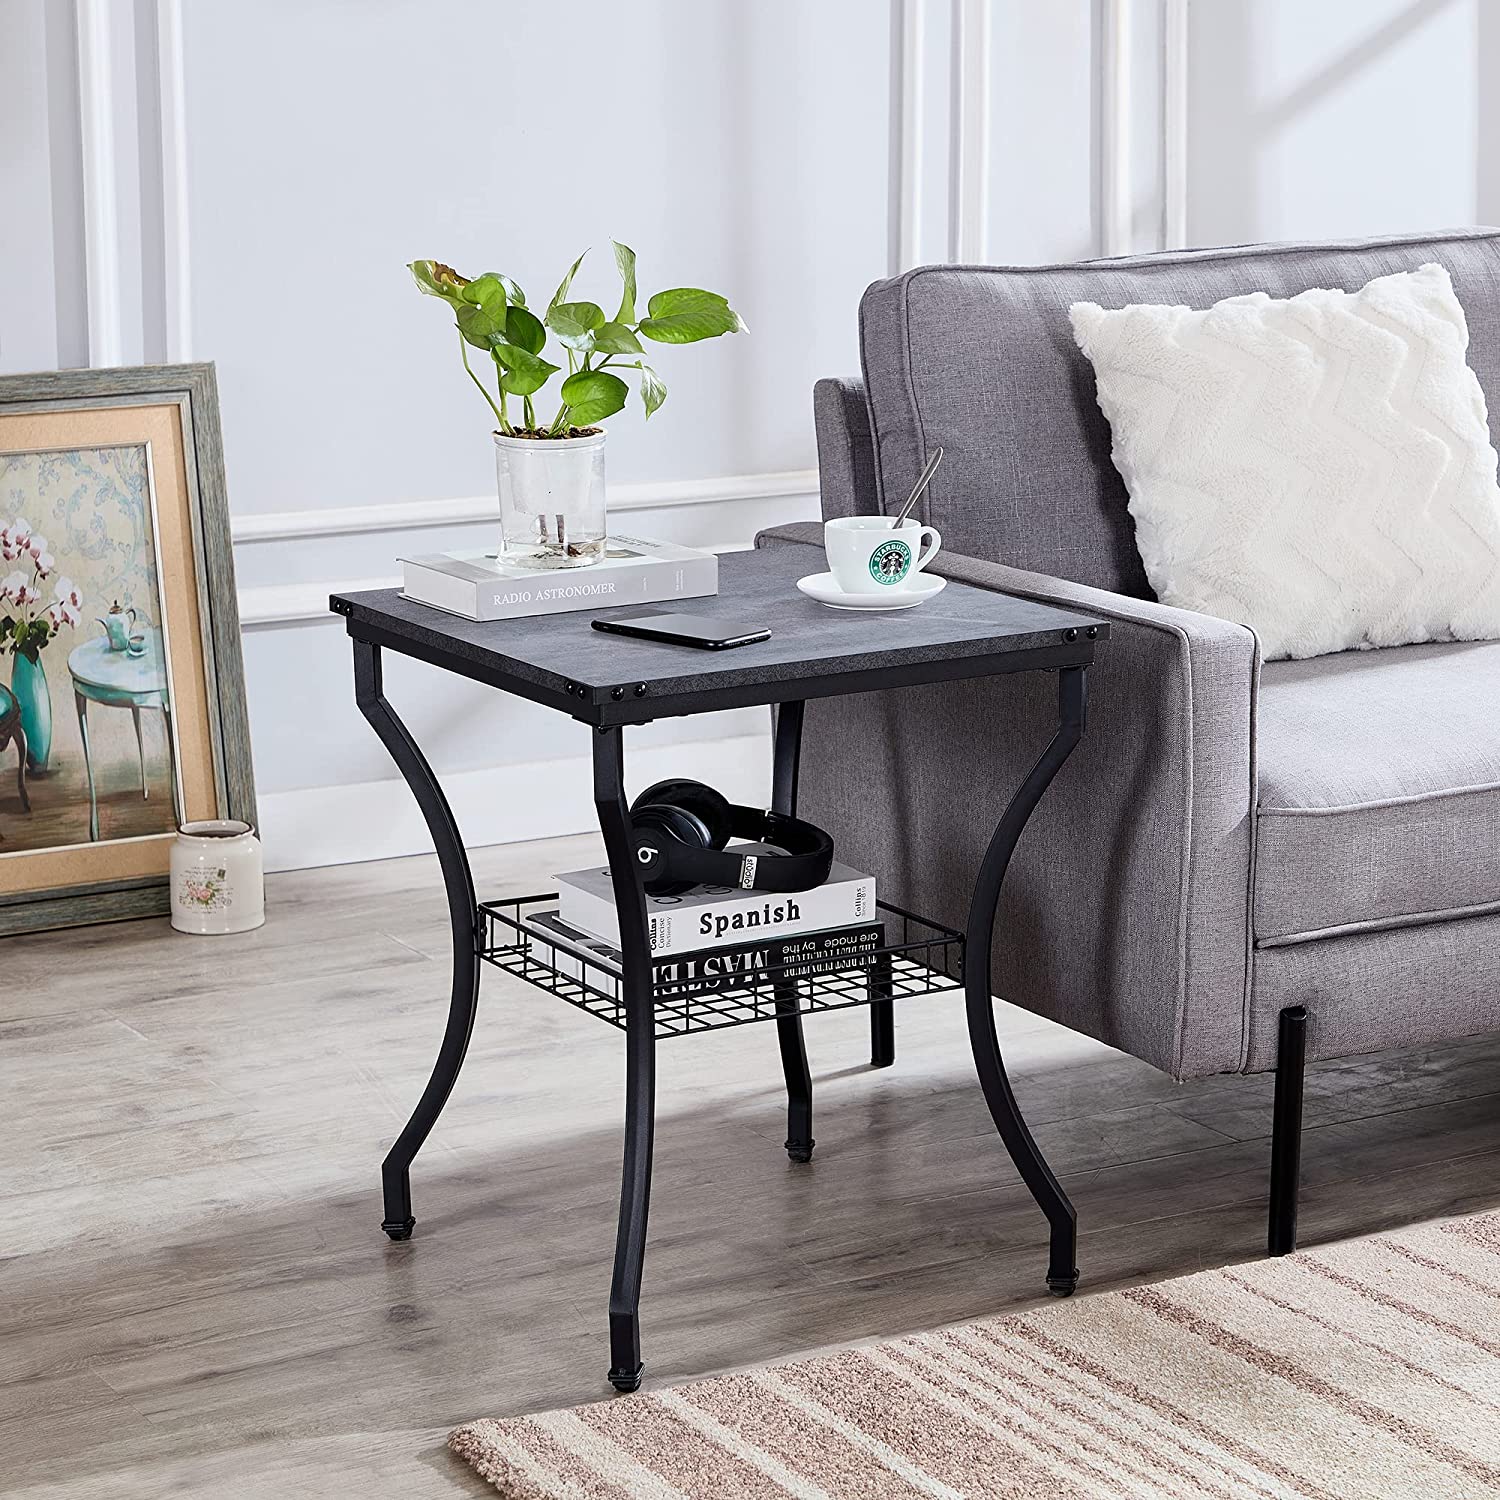 3 Pieces Living Room Sets Coffee and End Tables